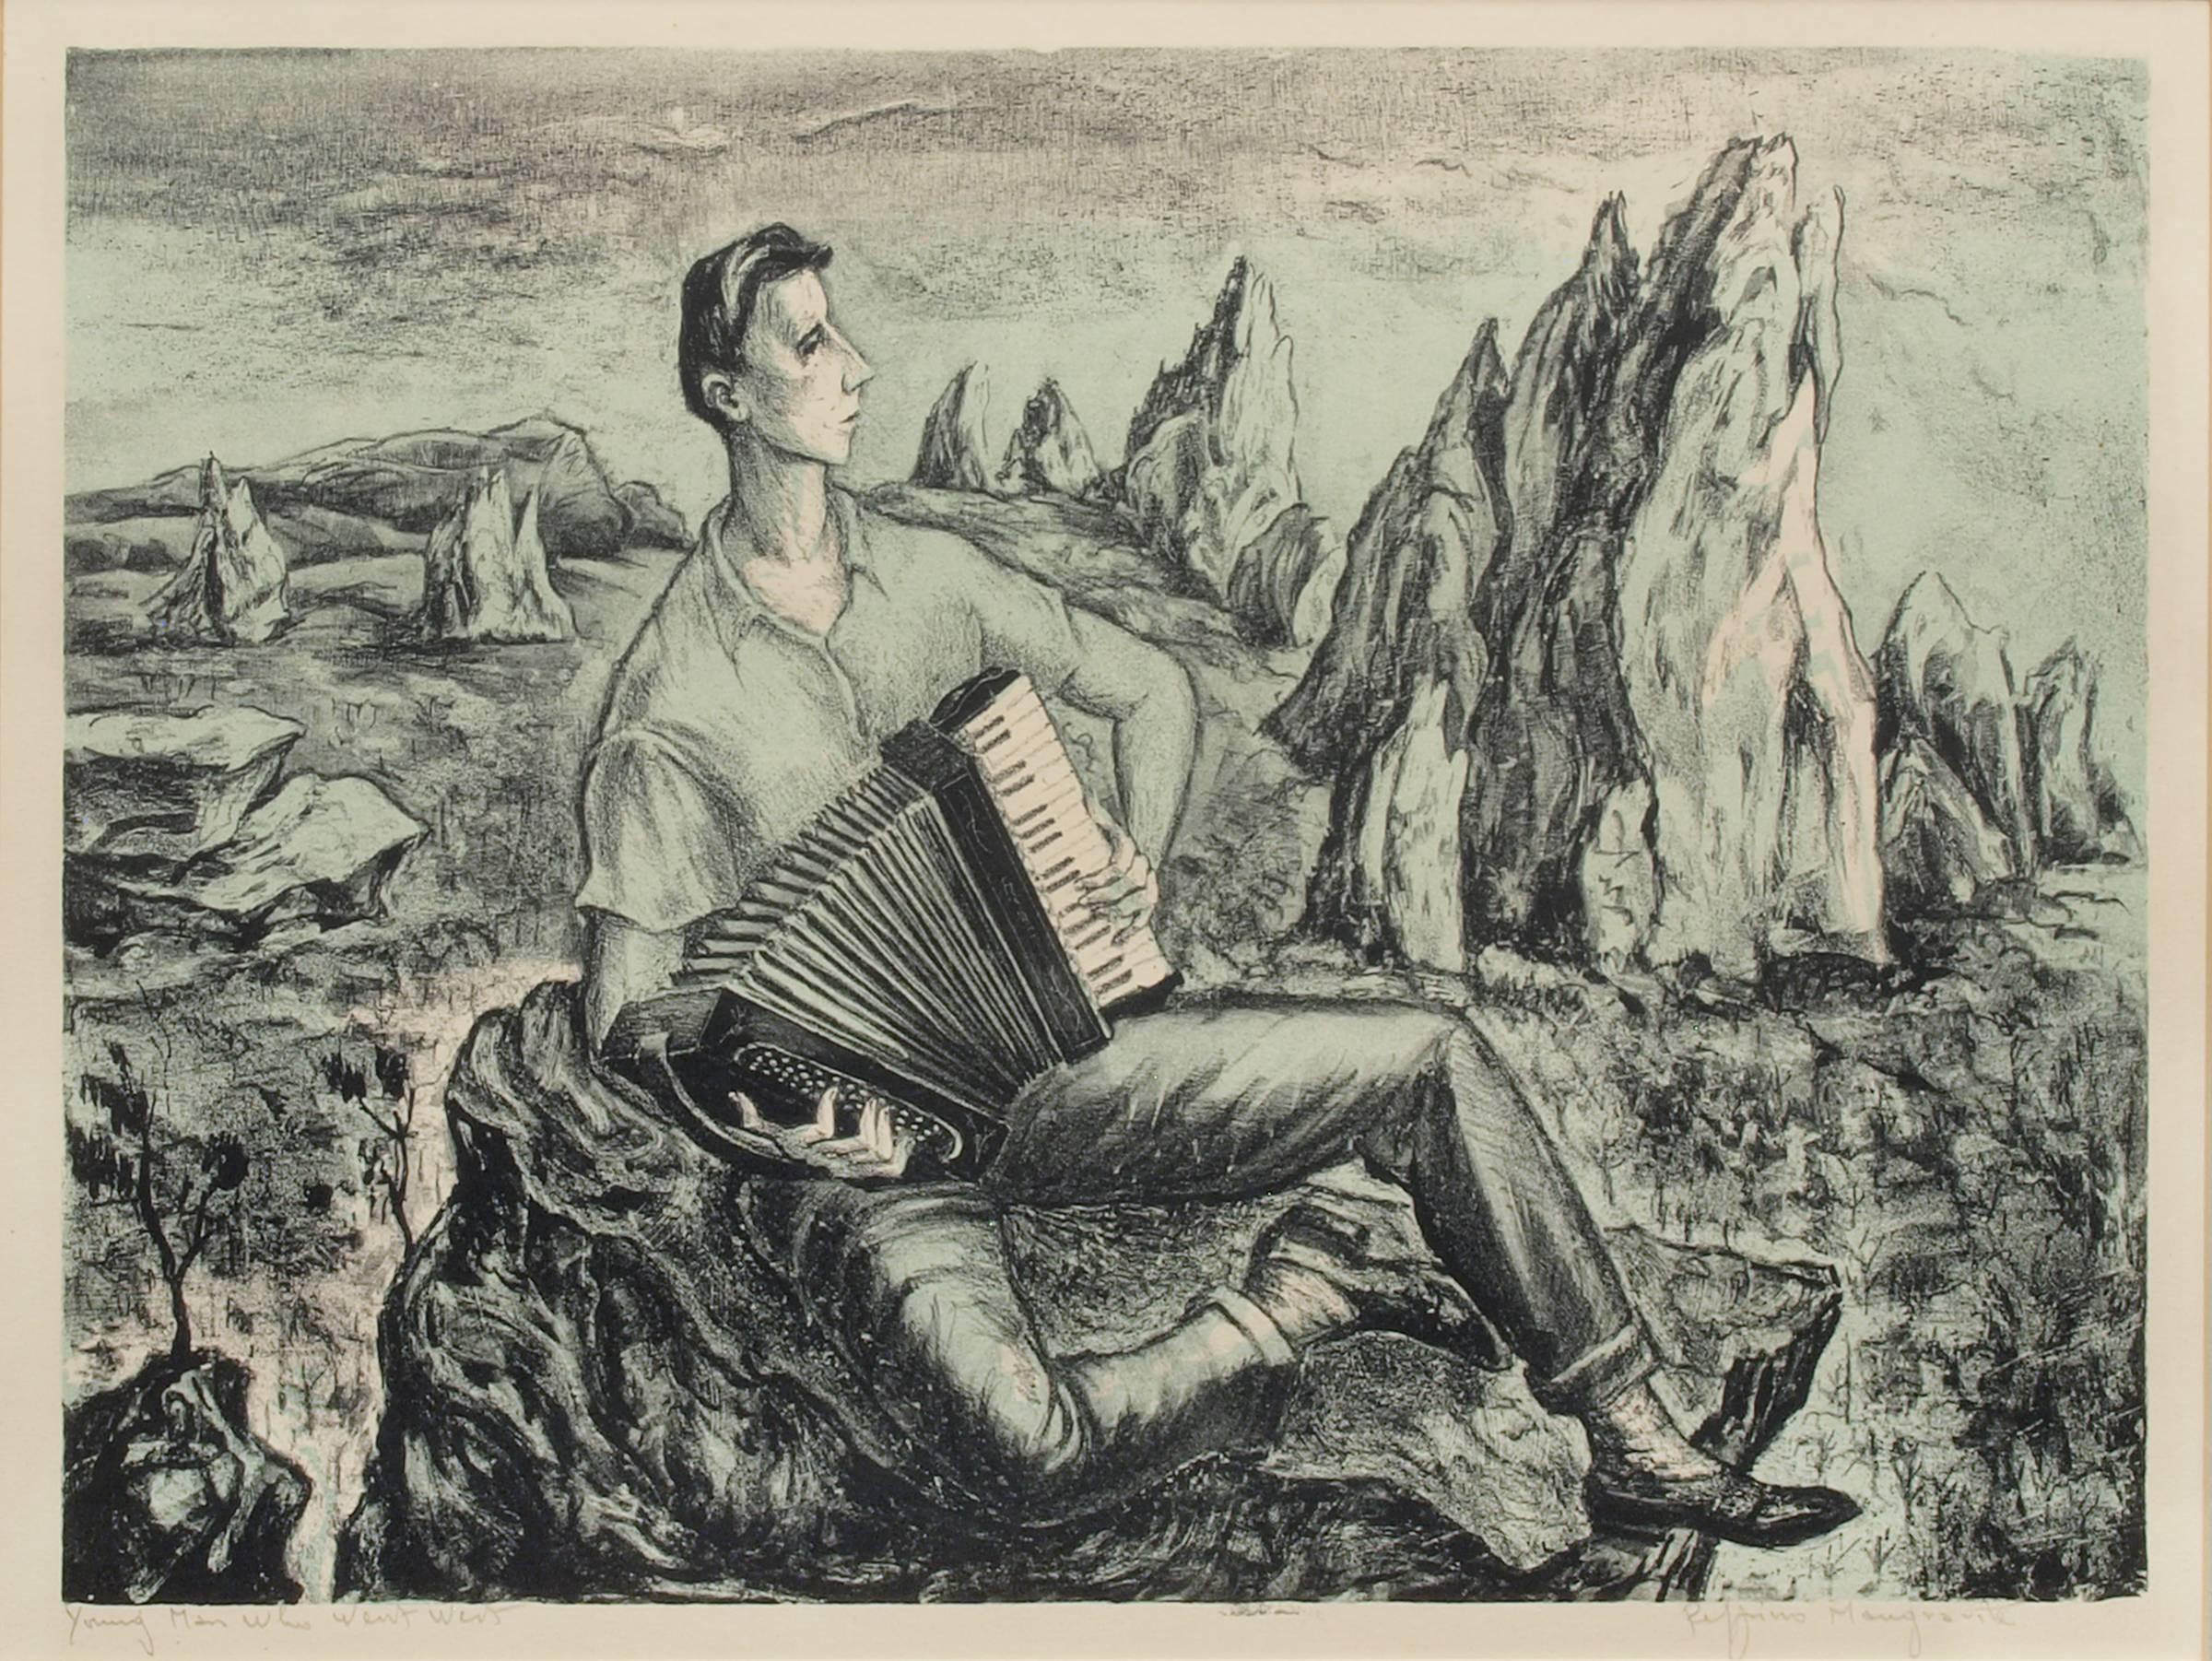 Young Man Who Went West, WPA Era Modernist Colorado Landscape With Figure - Print by Peppino Mangravite